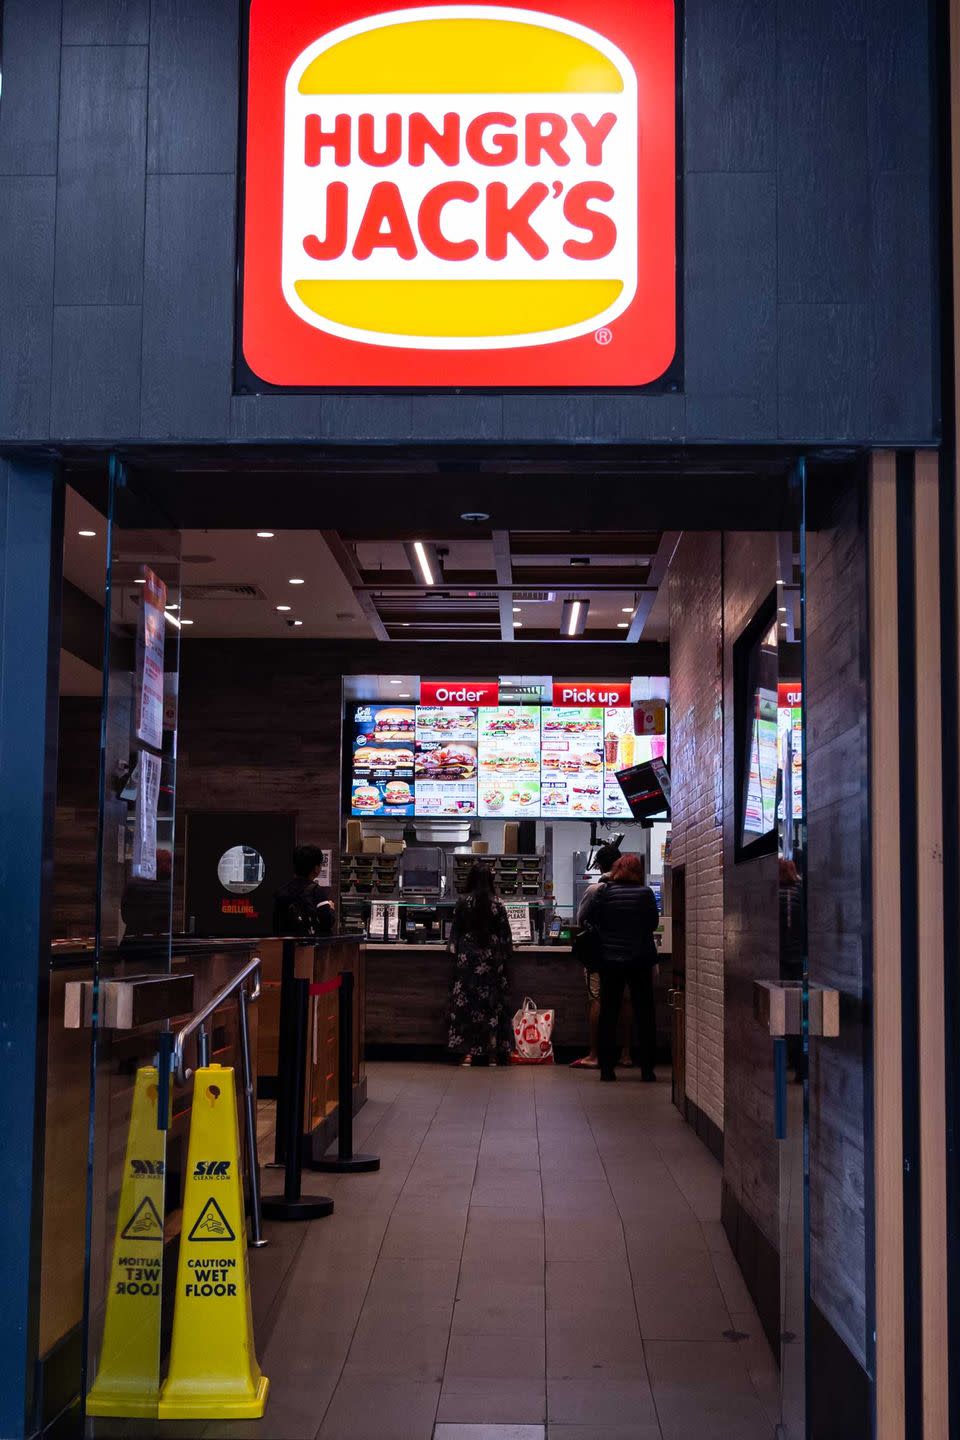 2) Burger King in Australia is called Hungry Jack’s.